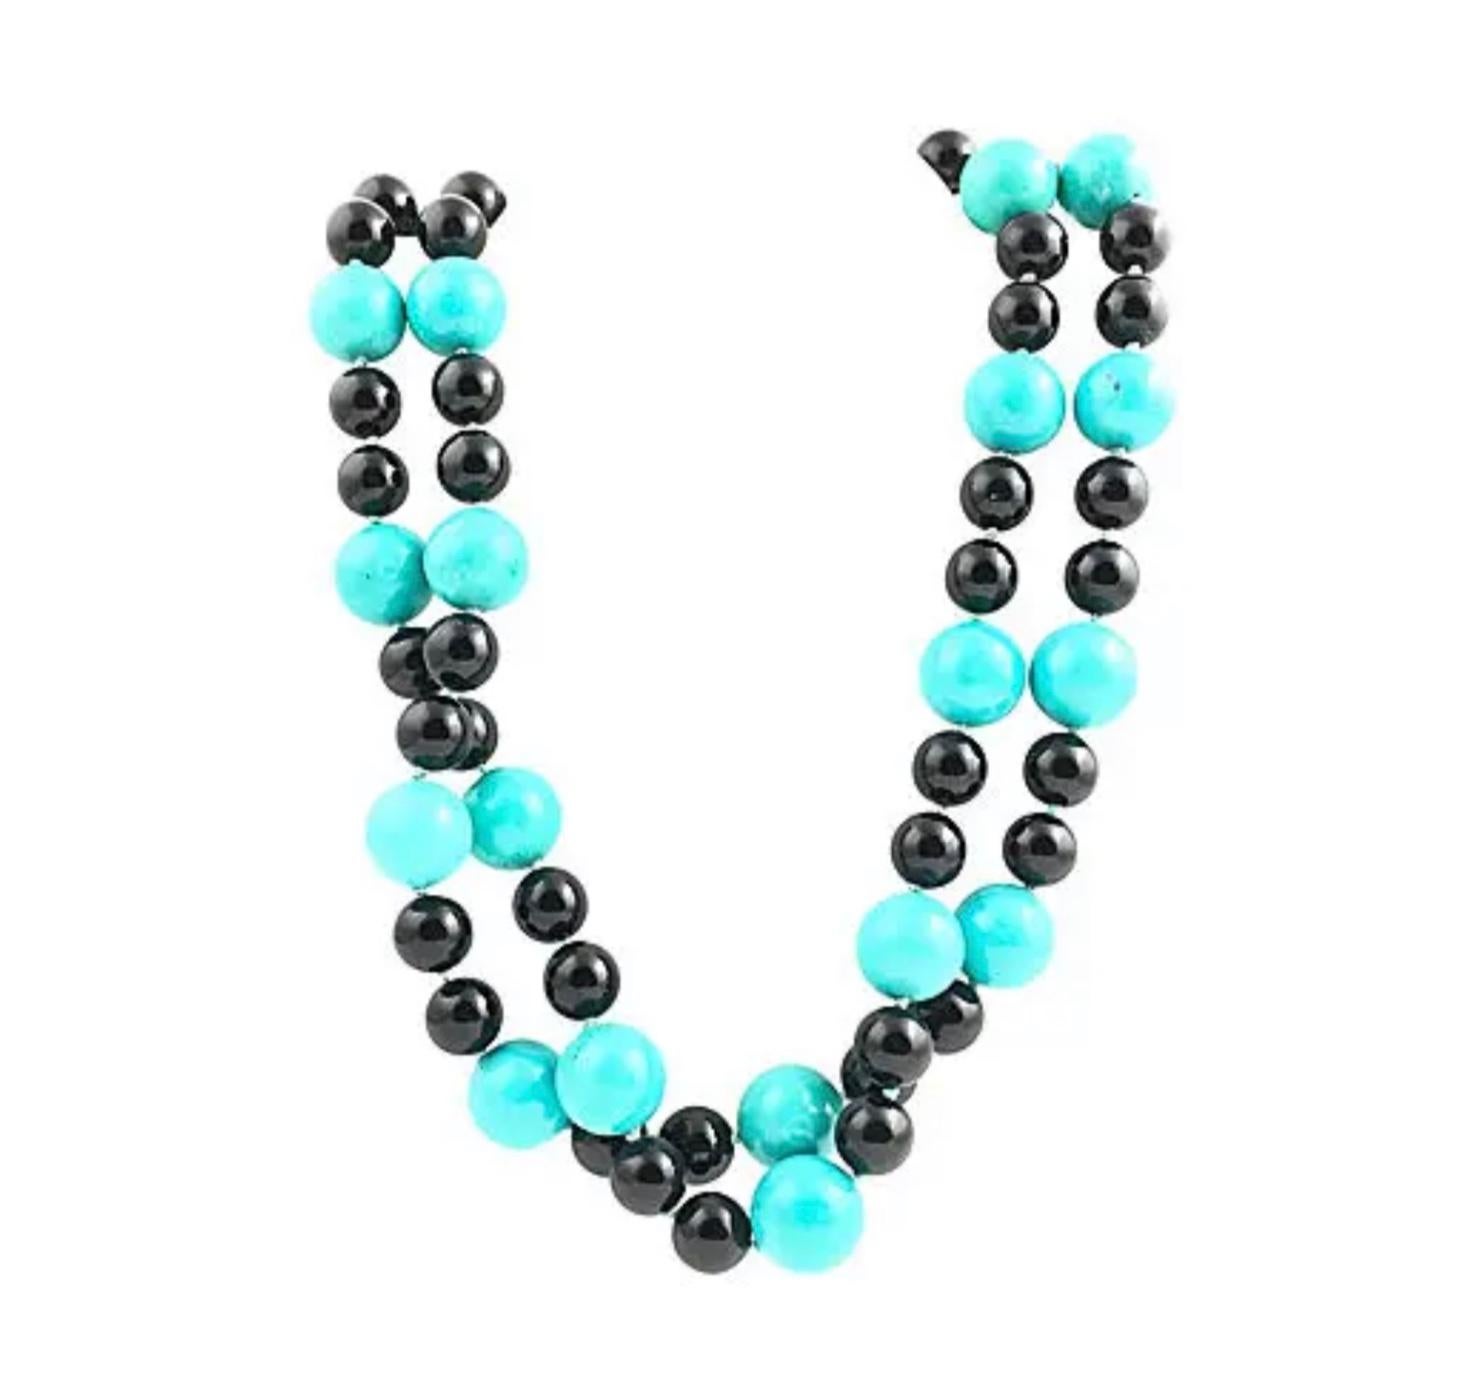 38” Long strand of 16mm reconstituted turquoise and 11.5mm onyx beads. Hand-strung with knots in between each bead. No clasp.
